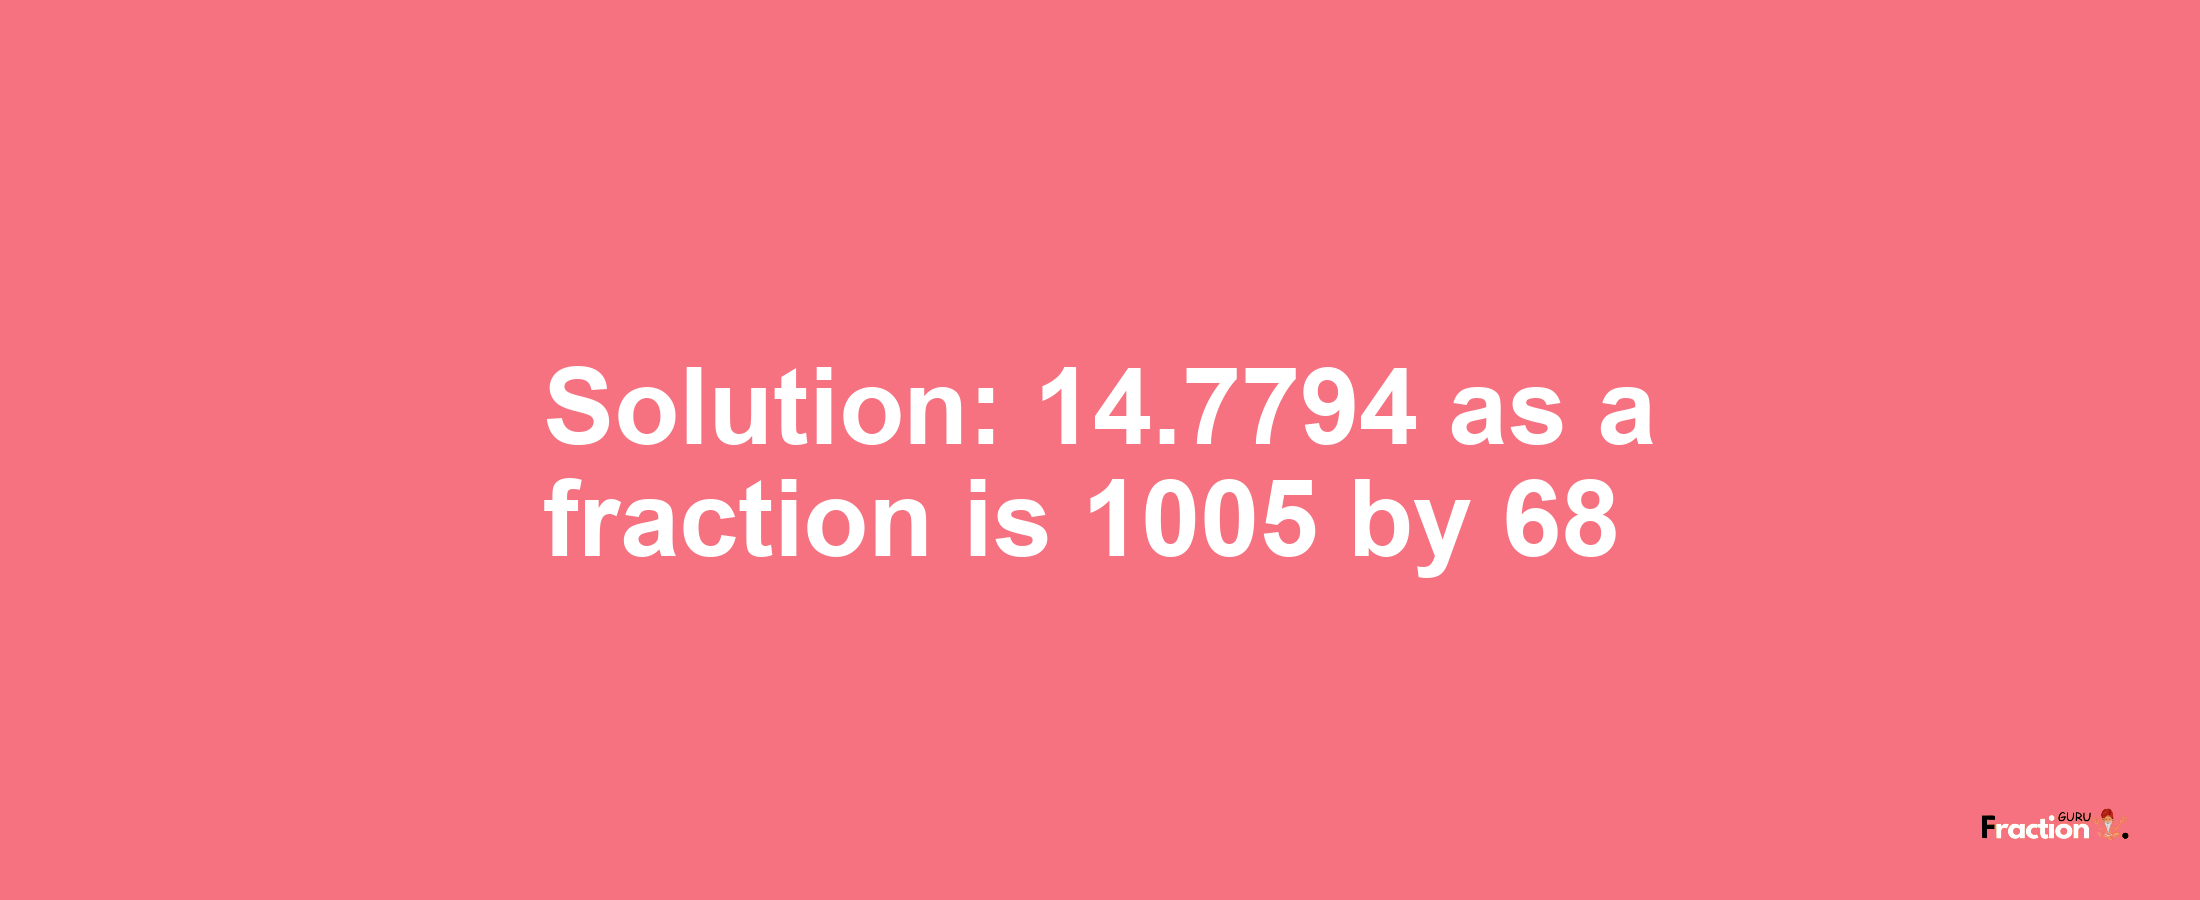 Solution:14.7794 as a fraction is 1005/68